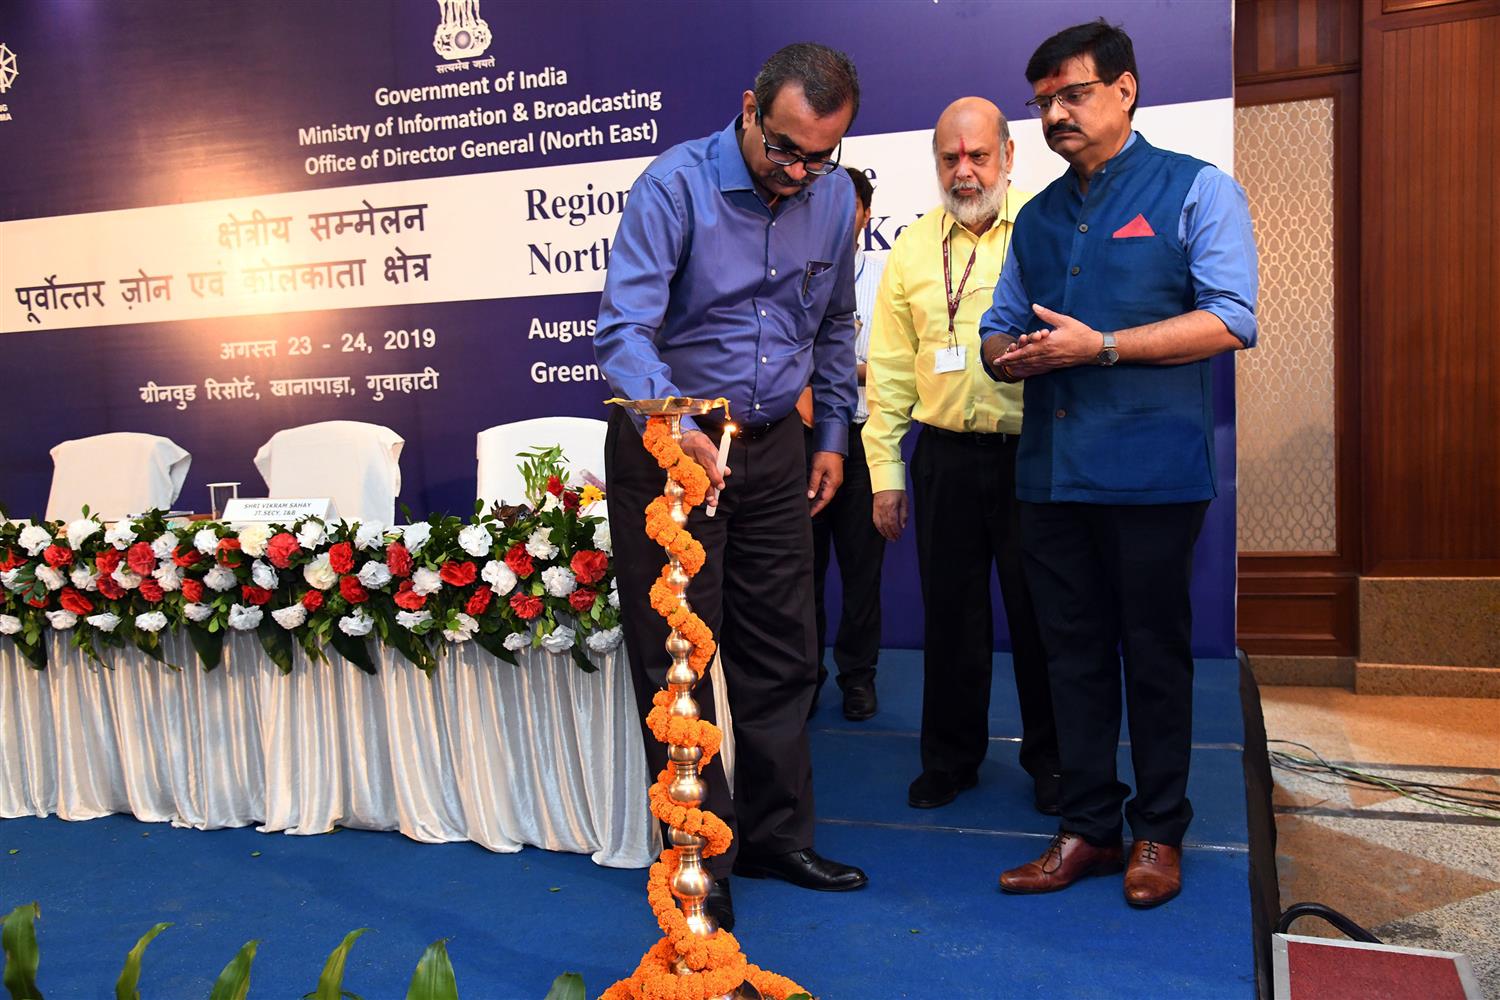 Shri. Vikram Sahay Joint Secretary, Ministry of I& B inaugurating 3rd Two Day Regional Conference of NE Zone & West Bengal  Region at Guwahati on 23rd  August 2019, Shri. L.R Vishwanath, Director General North East Zone, Shri. Satyendra Prakash, Director General, BOC, New Delhi are also seen in the picture.